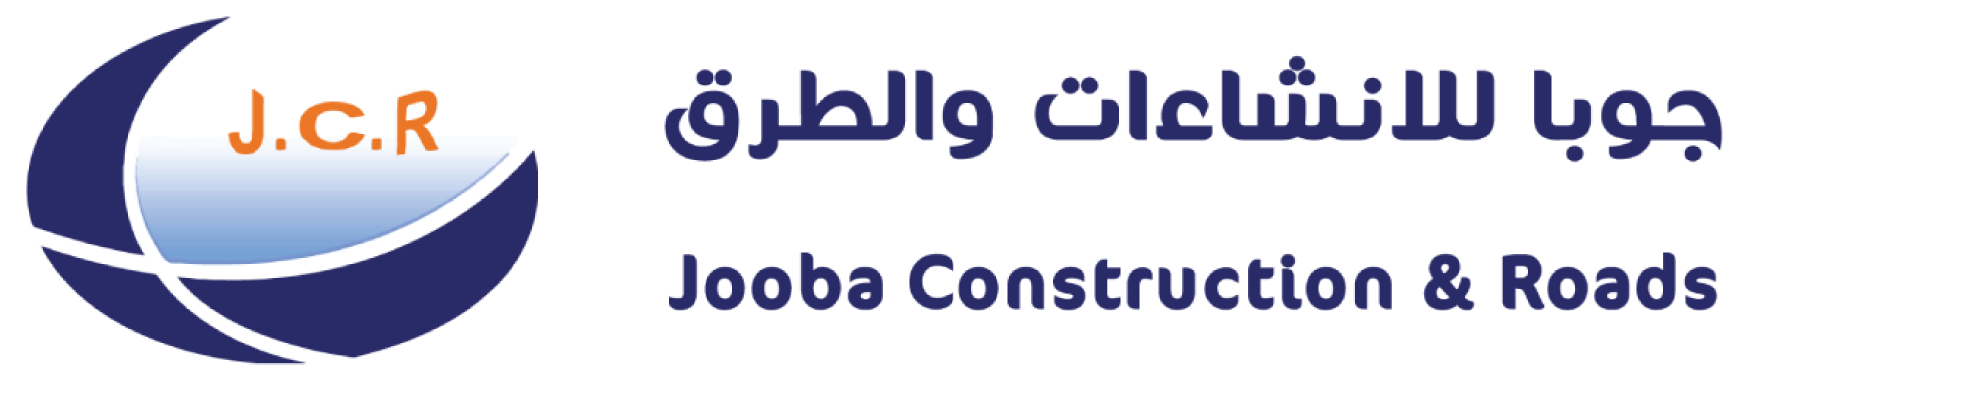 Jooba-Construction and Roads